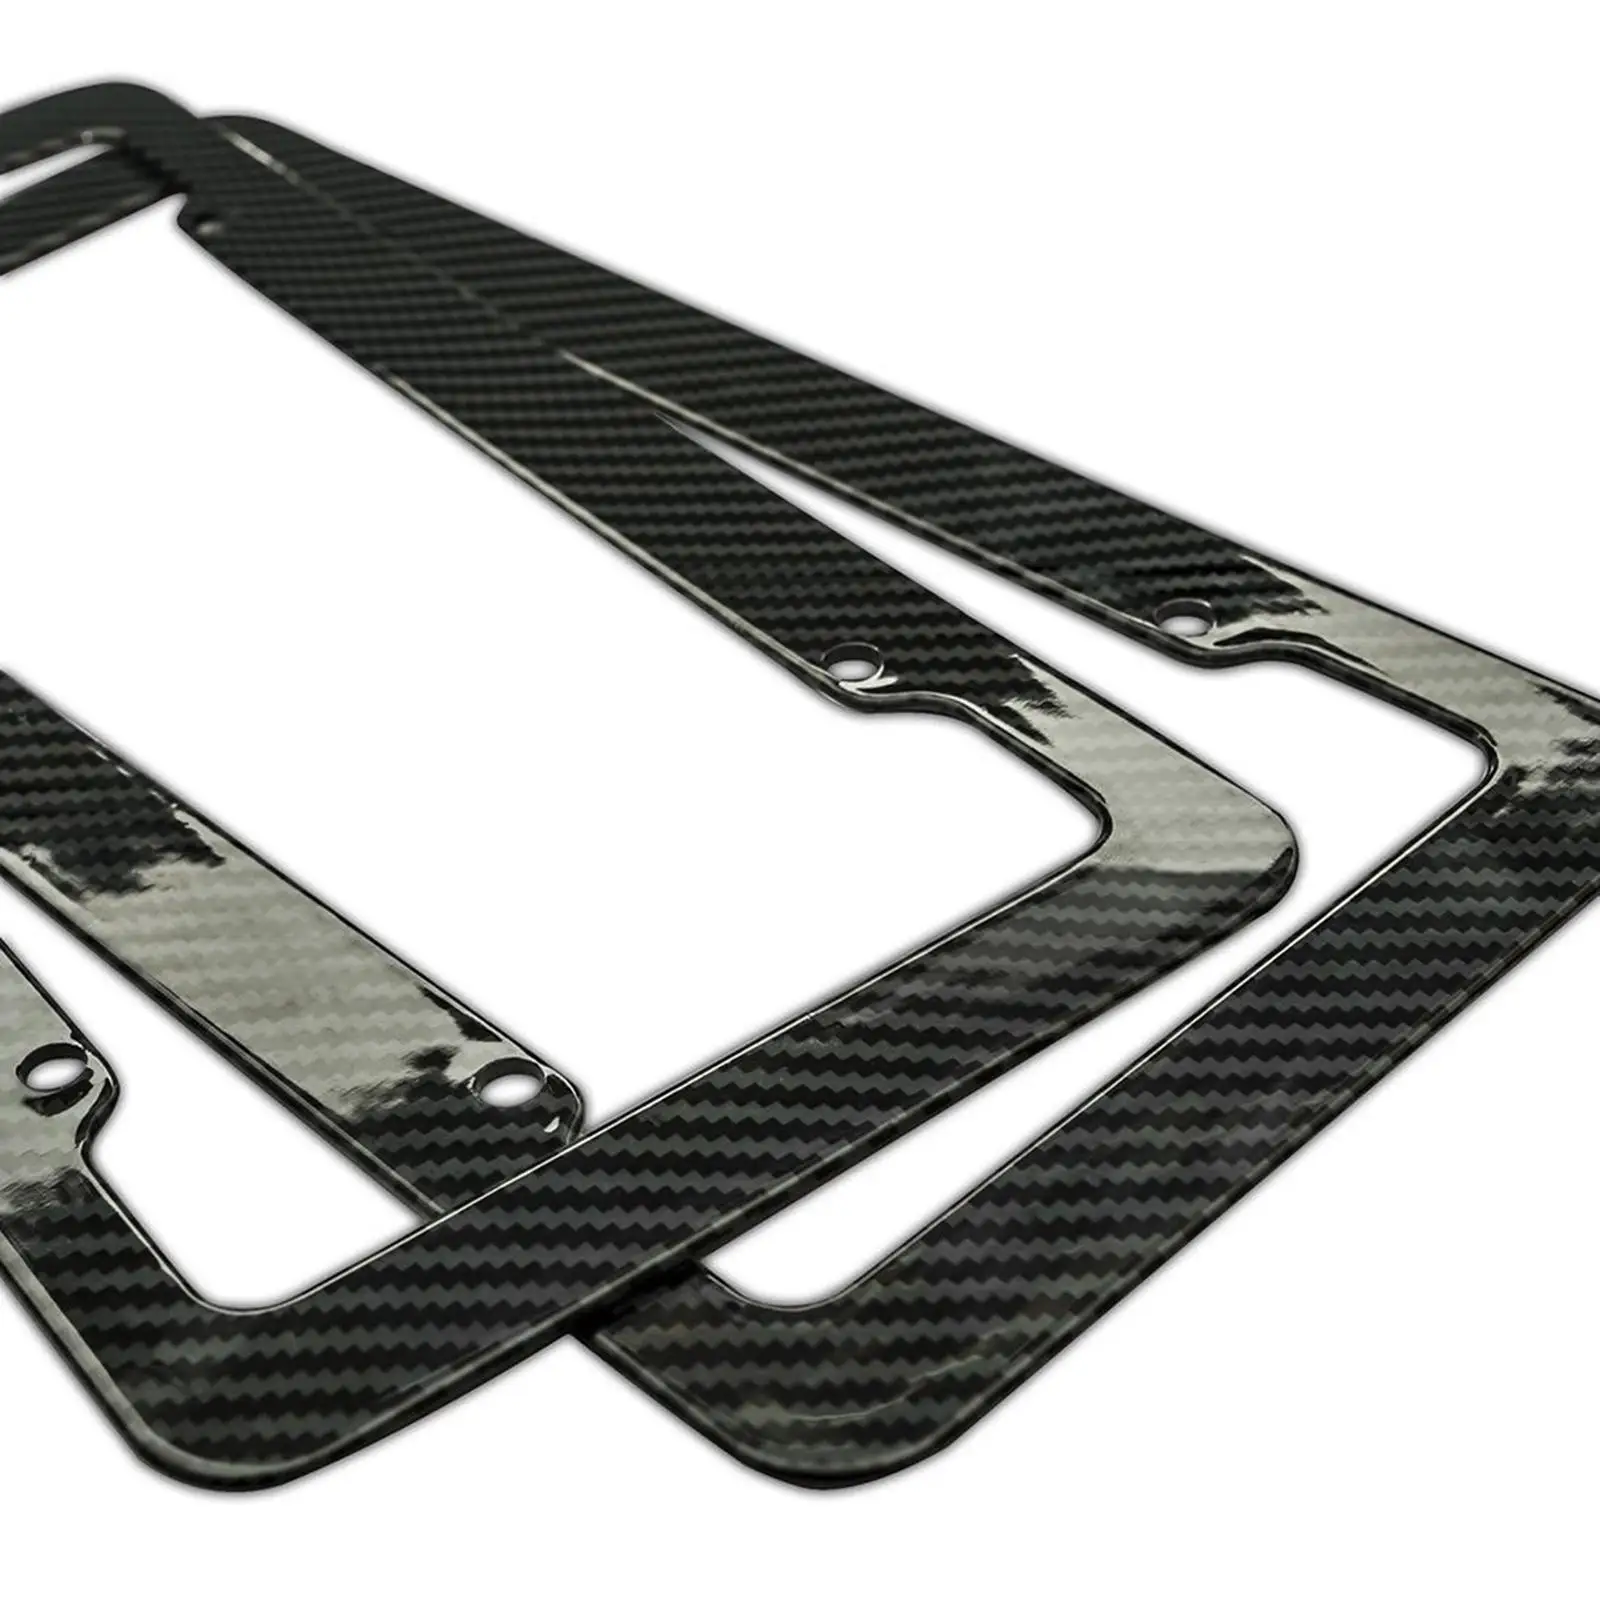 2Pcs Carbon Fiber Style  Frames Front and Rear with Screws Holder Plate Covers for Truck us Install